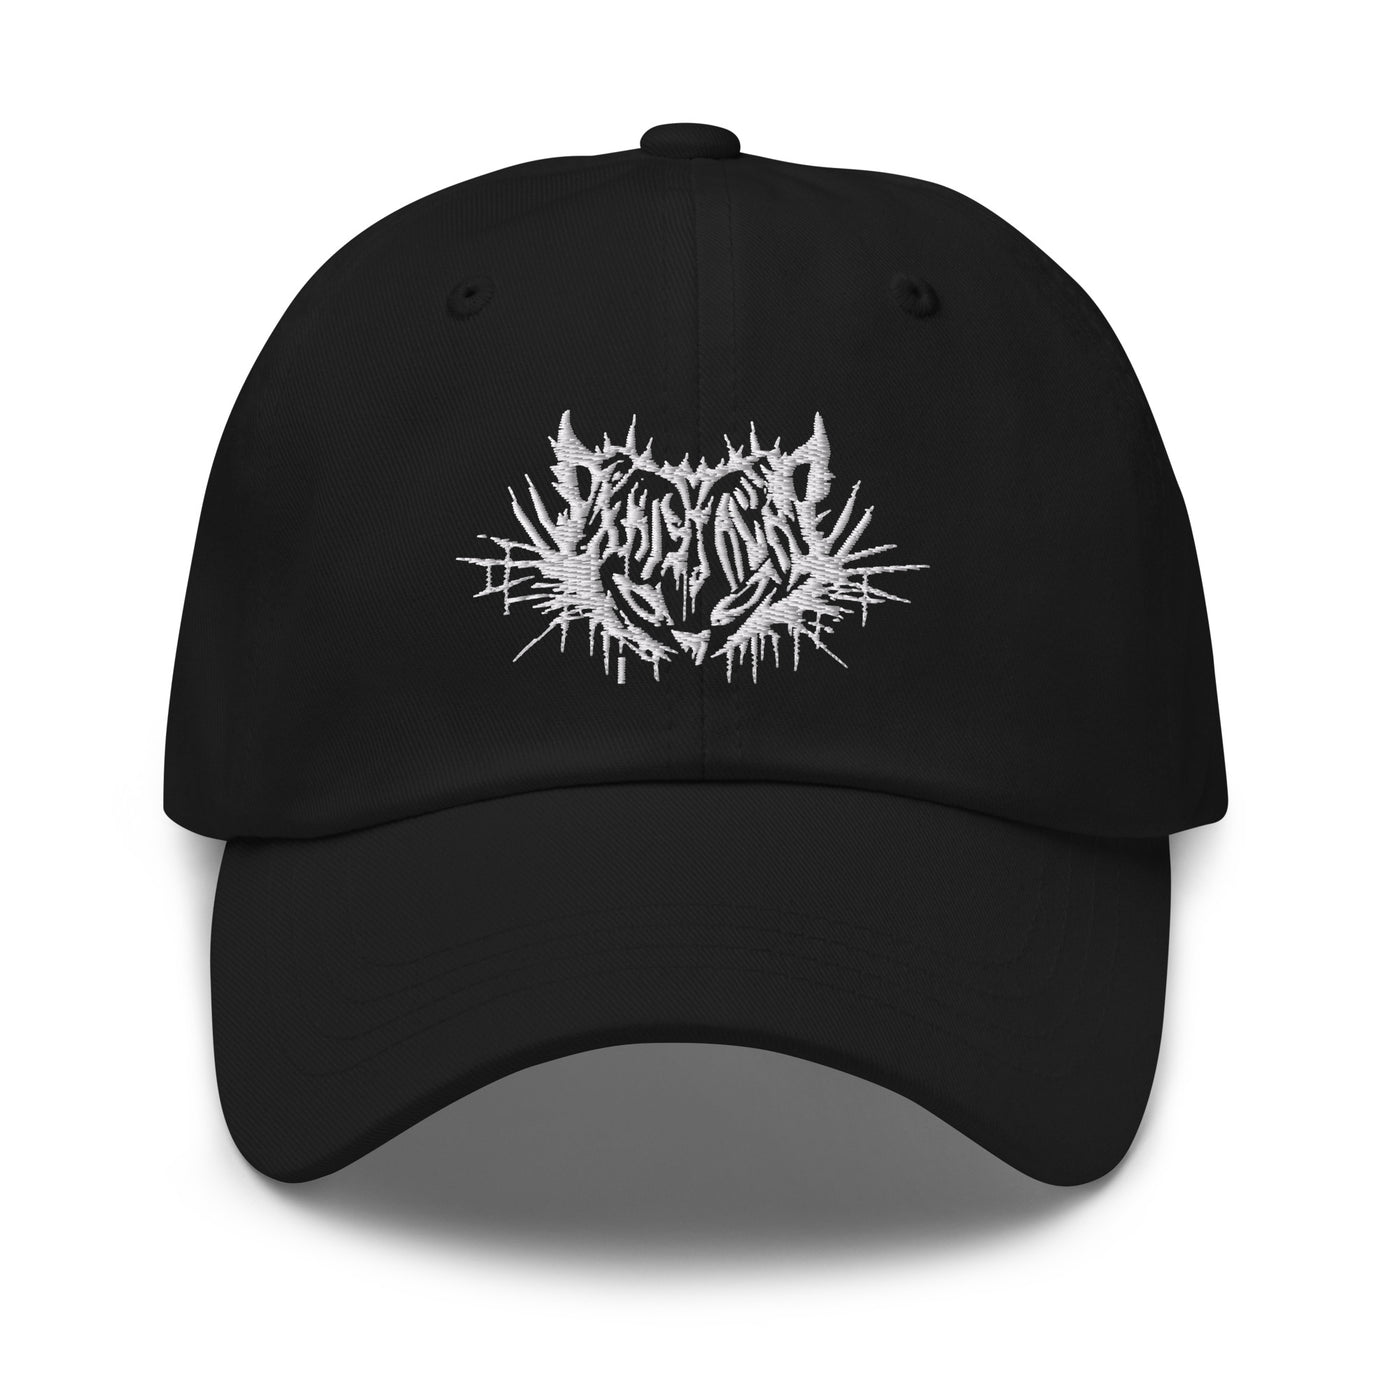 front view of black baseball hat dad cap with kristala x metal voices white cat logo white background